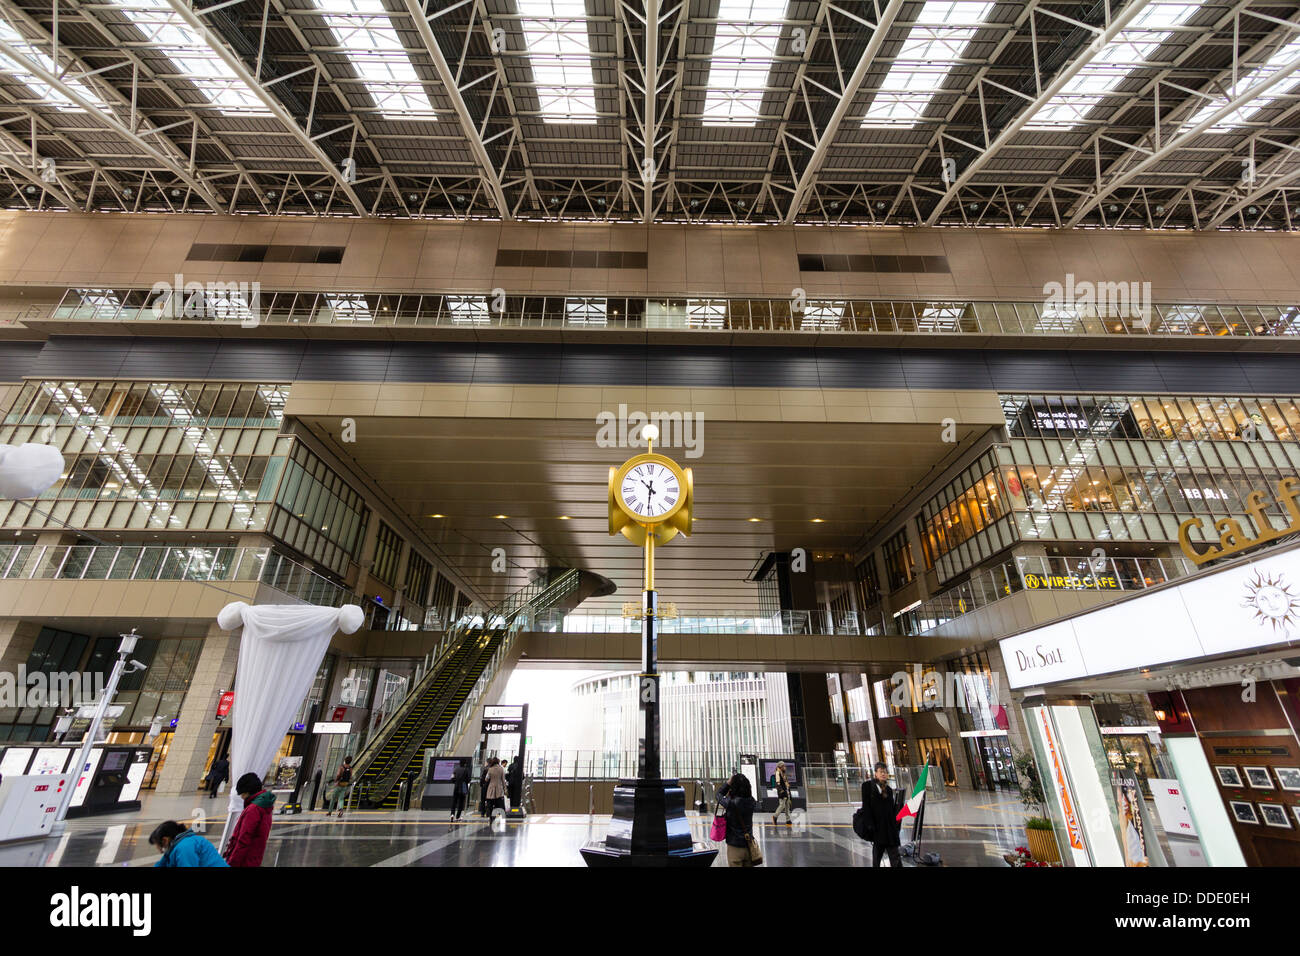 Interior of Osaka station from the middle bridge over the platform along to the main entrance atrium with the clock stand in foreground. Few people. Stock Photo